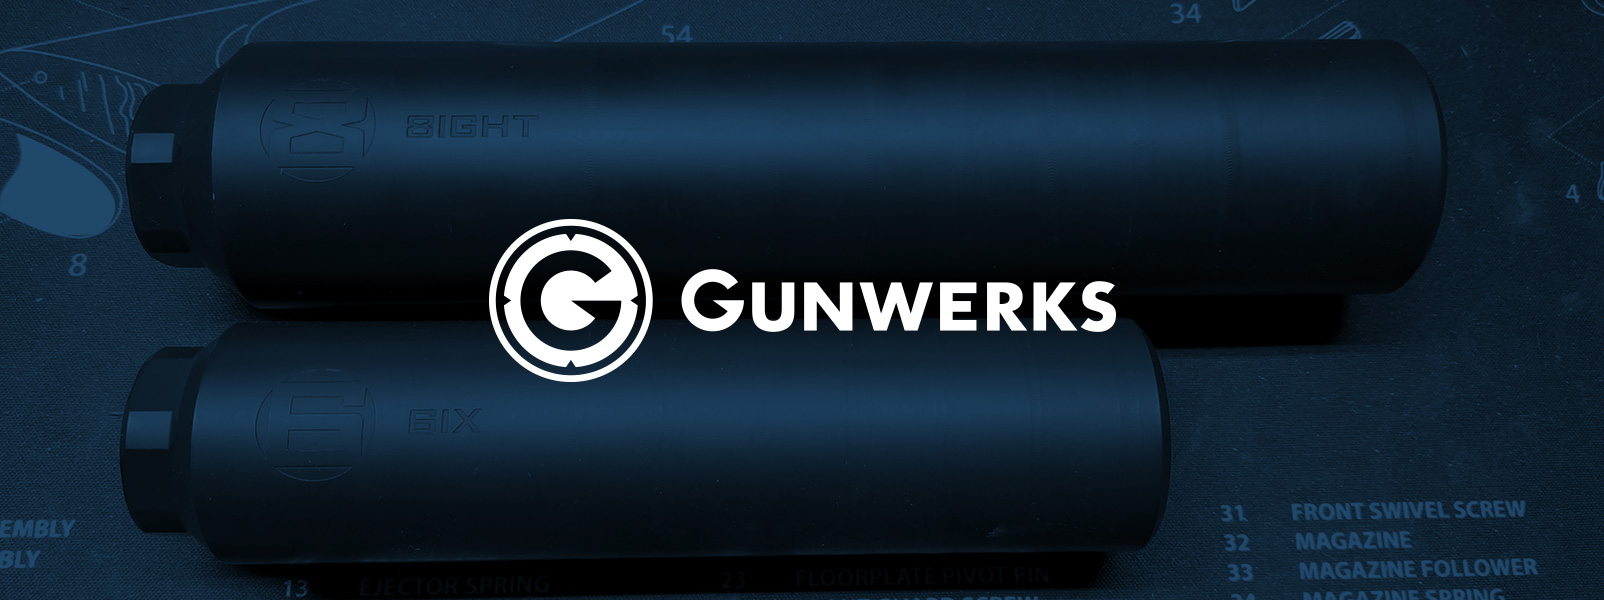 Read more about the article GUNWERKS BECOMES TIER 3 SPONSORS OF ASA, JOINS ASA BOARD